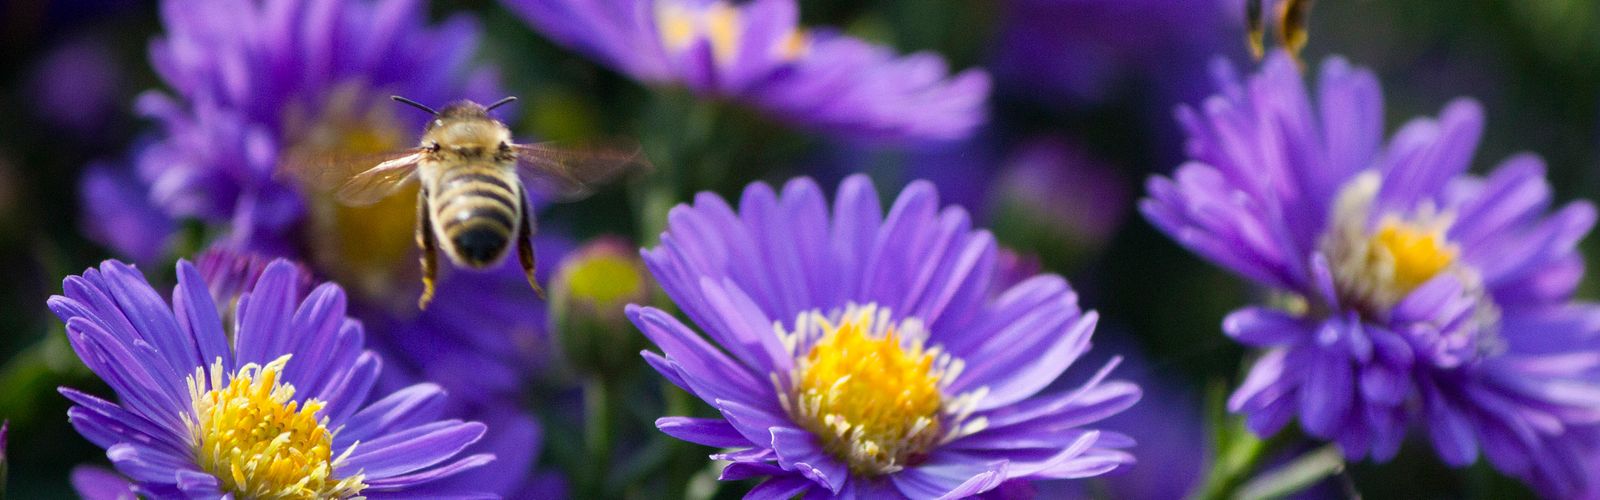 Closeup of a bee hovering near large purple flowers.